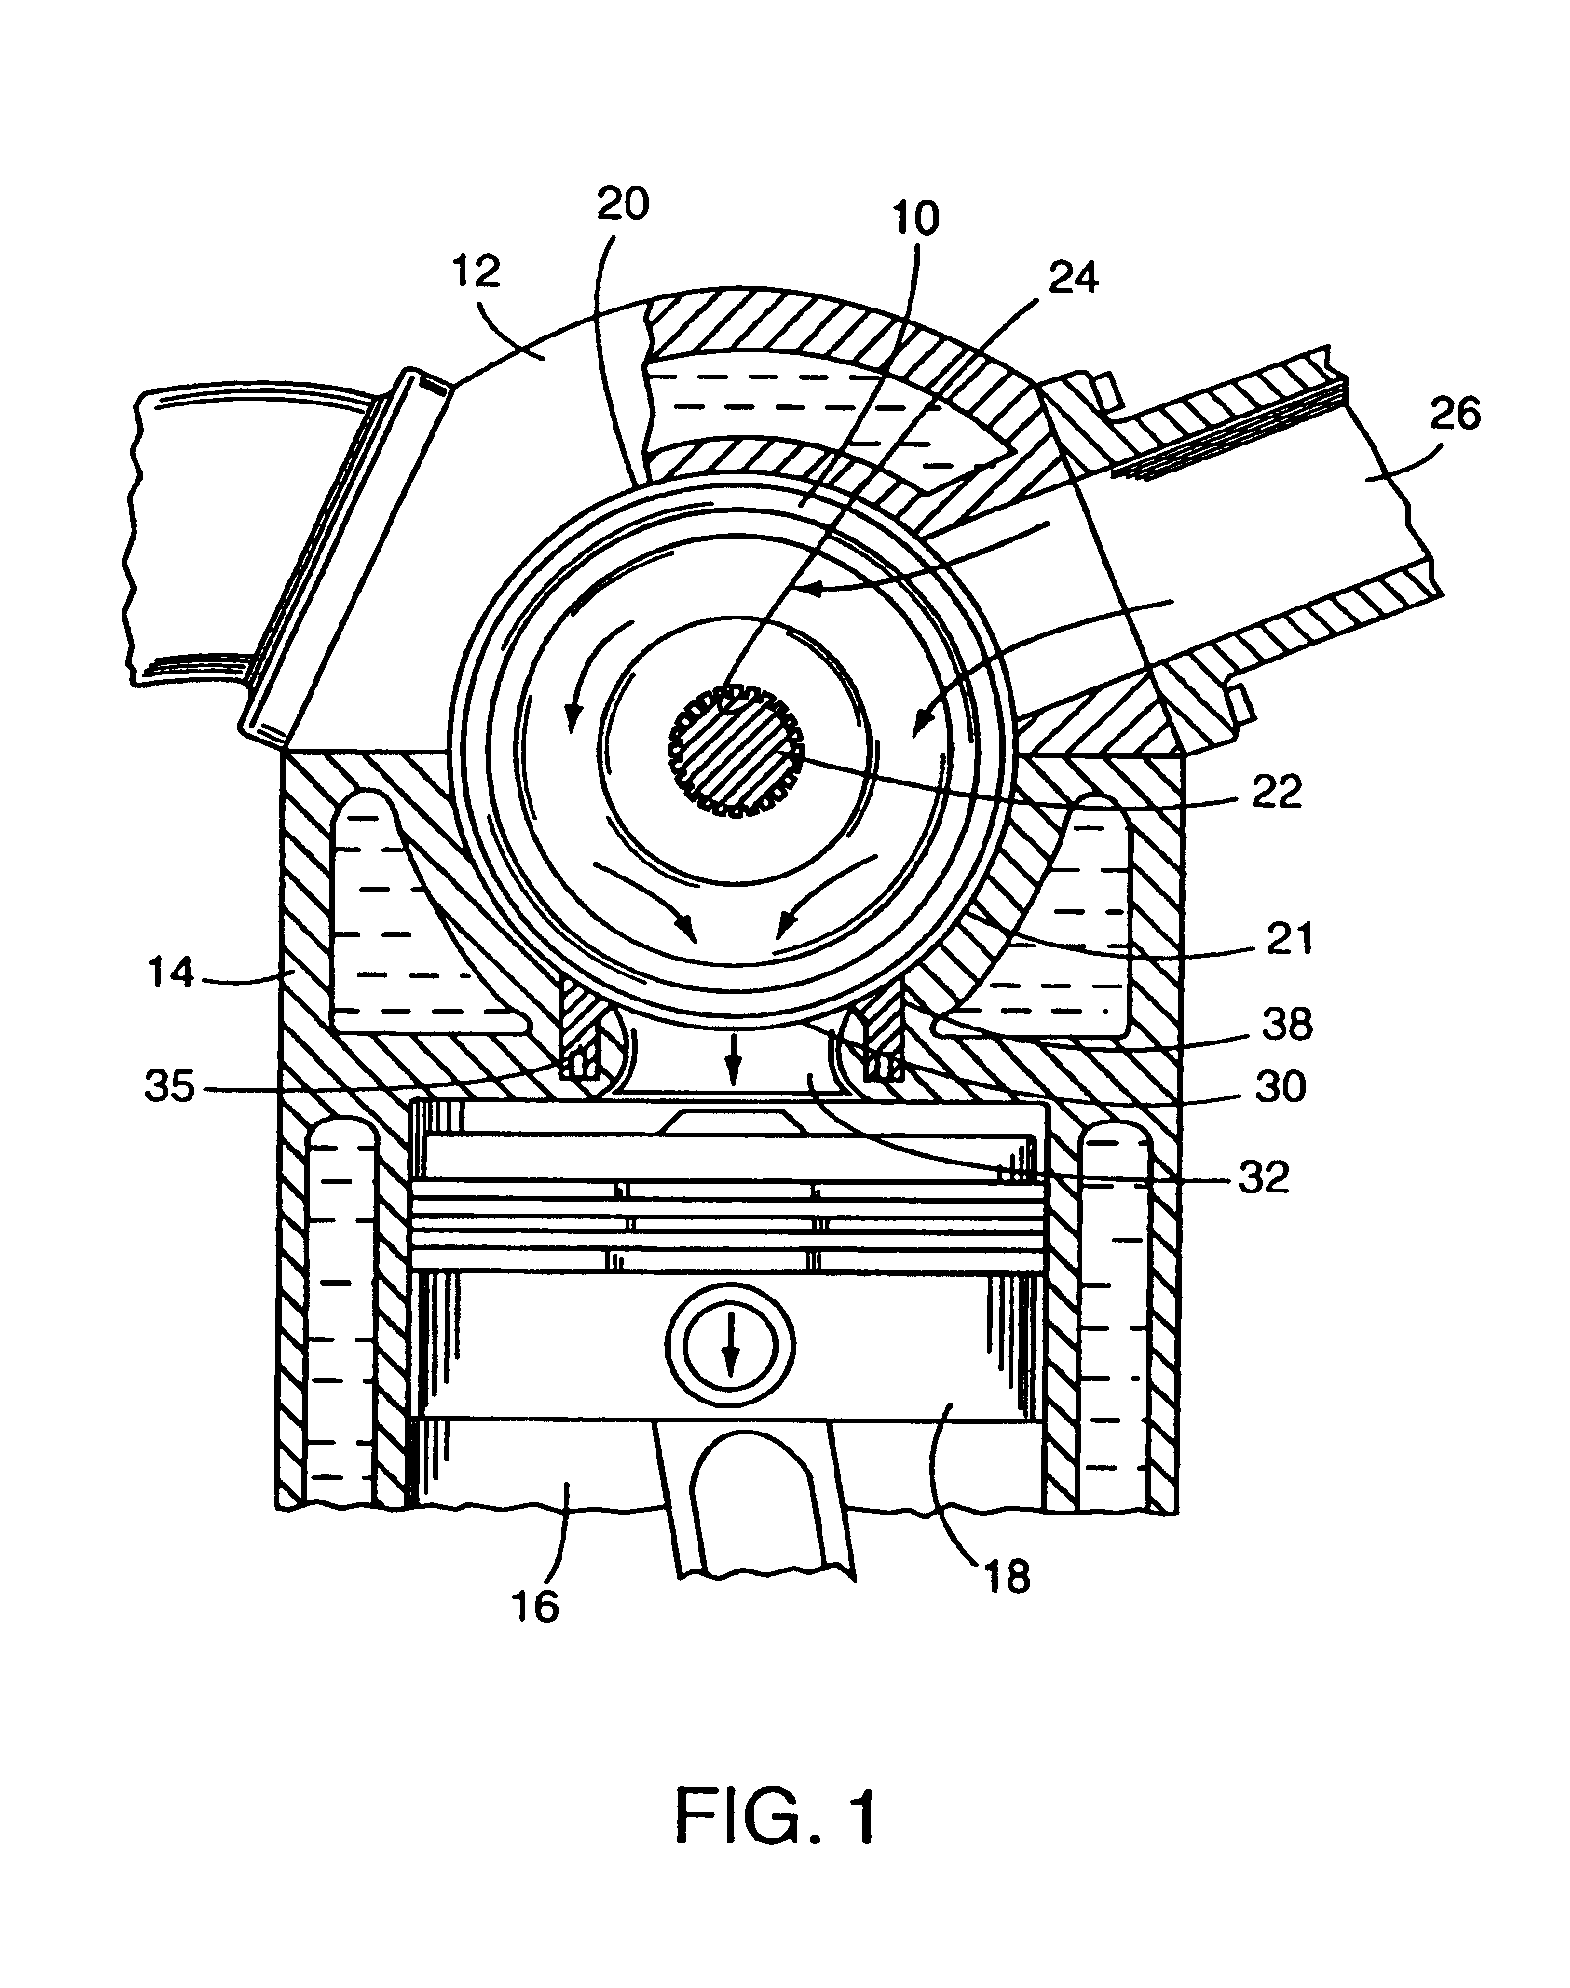 Valve seal assembly for rotary valve engine